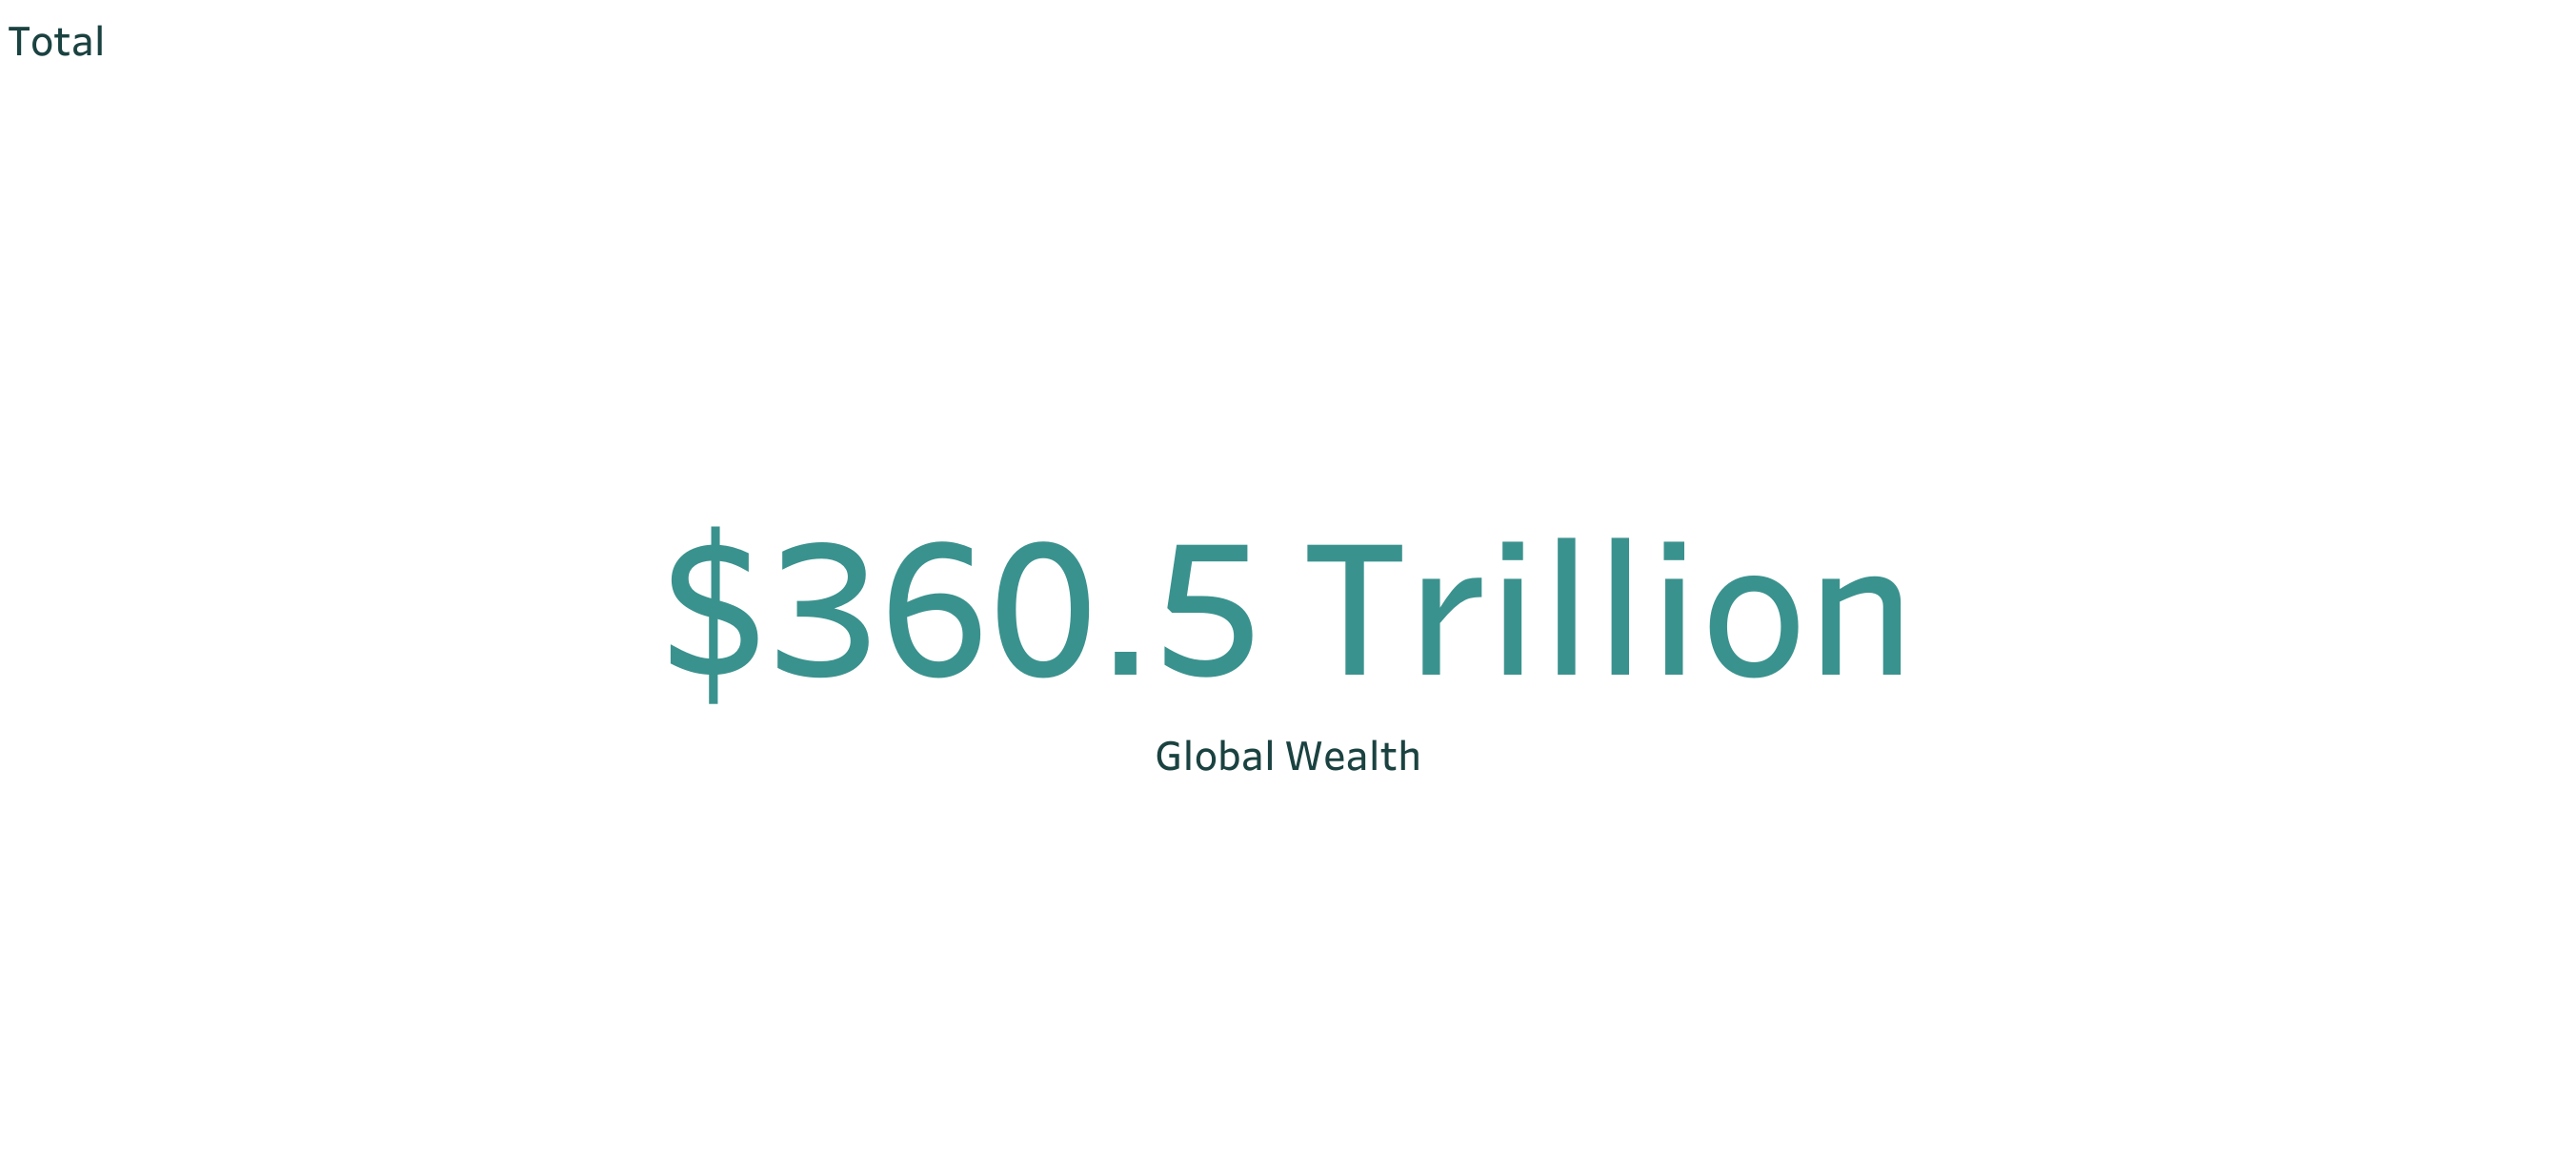 Can You Guess How Wealth is Distributed Around the World? | by Robert Thas  John | Medium